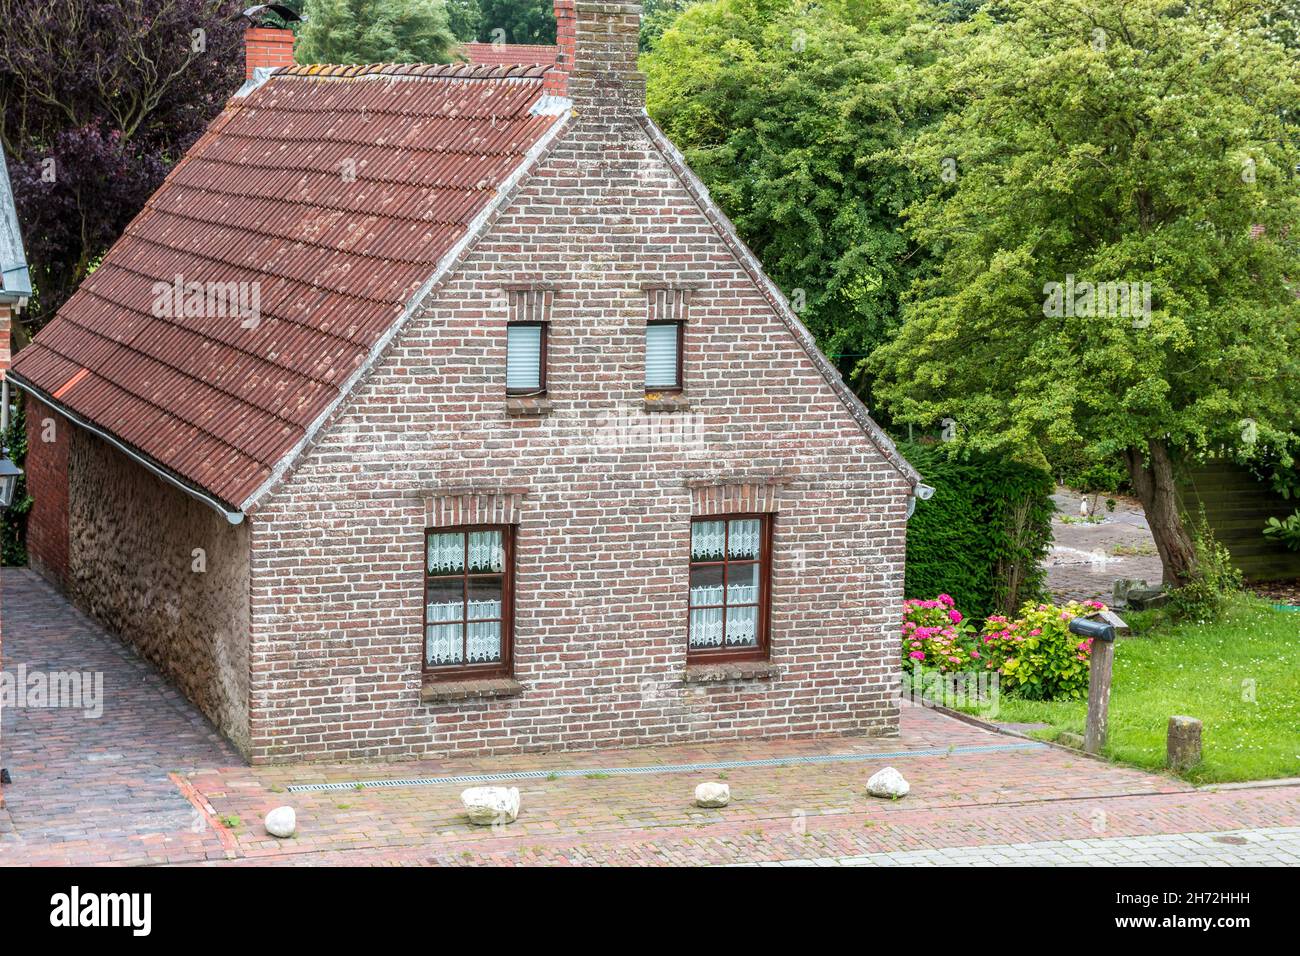 House made of red clincker bricks surrounded by green trees Stock Photo